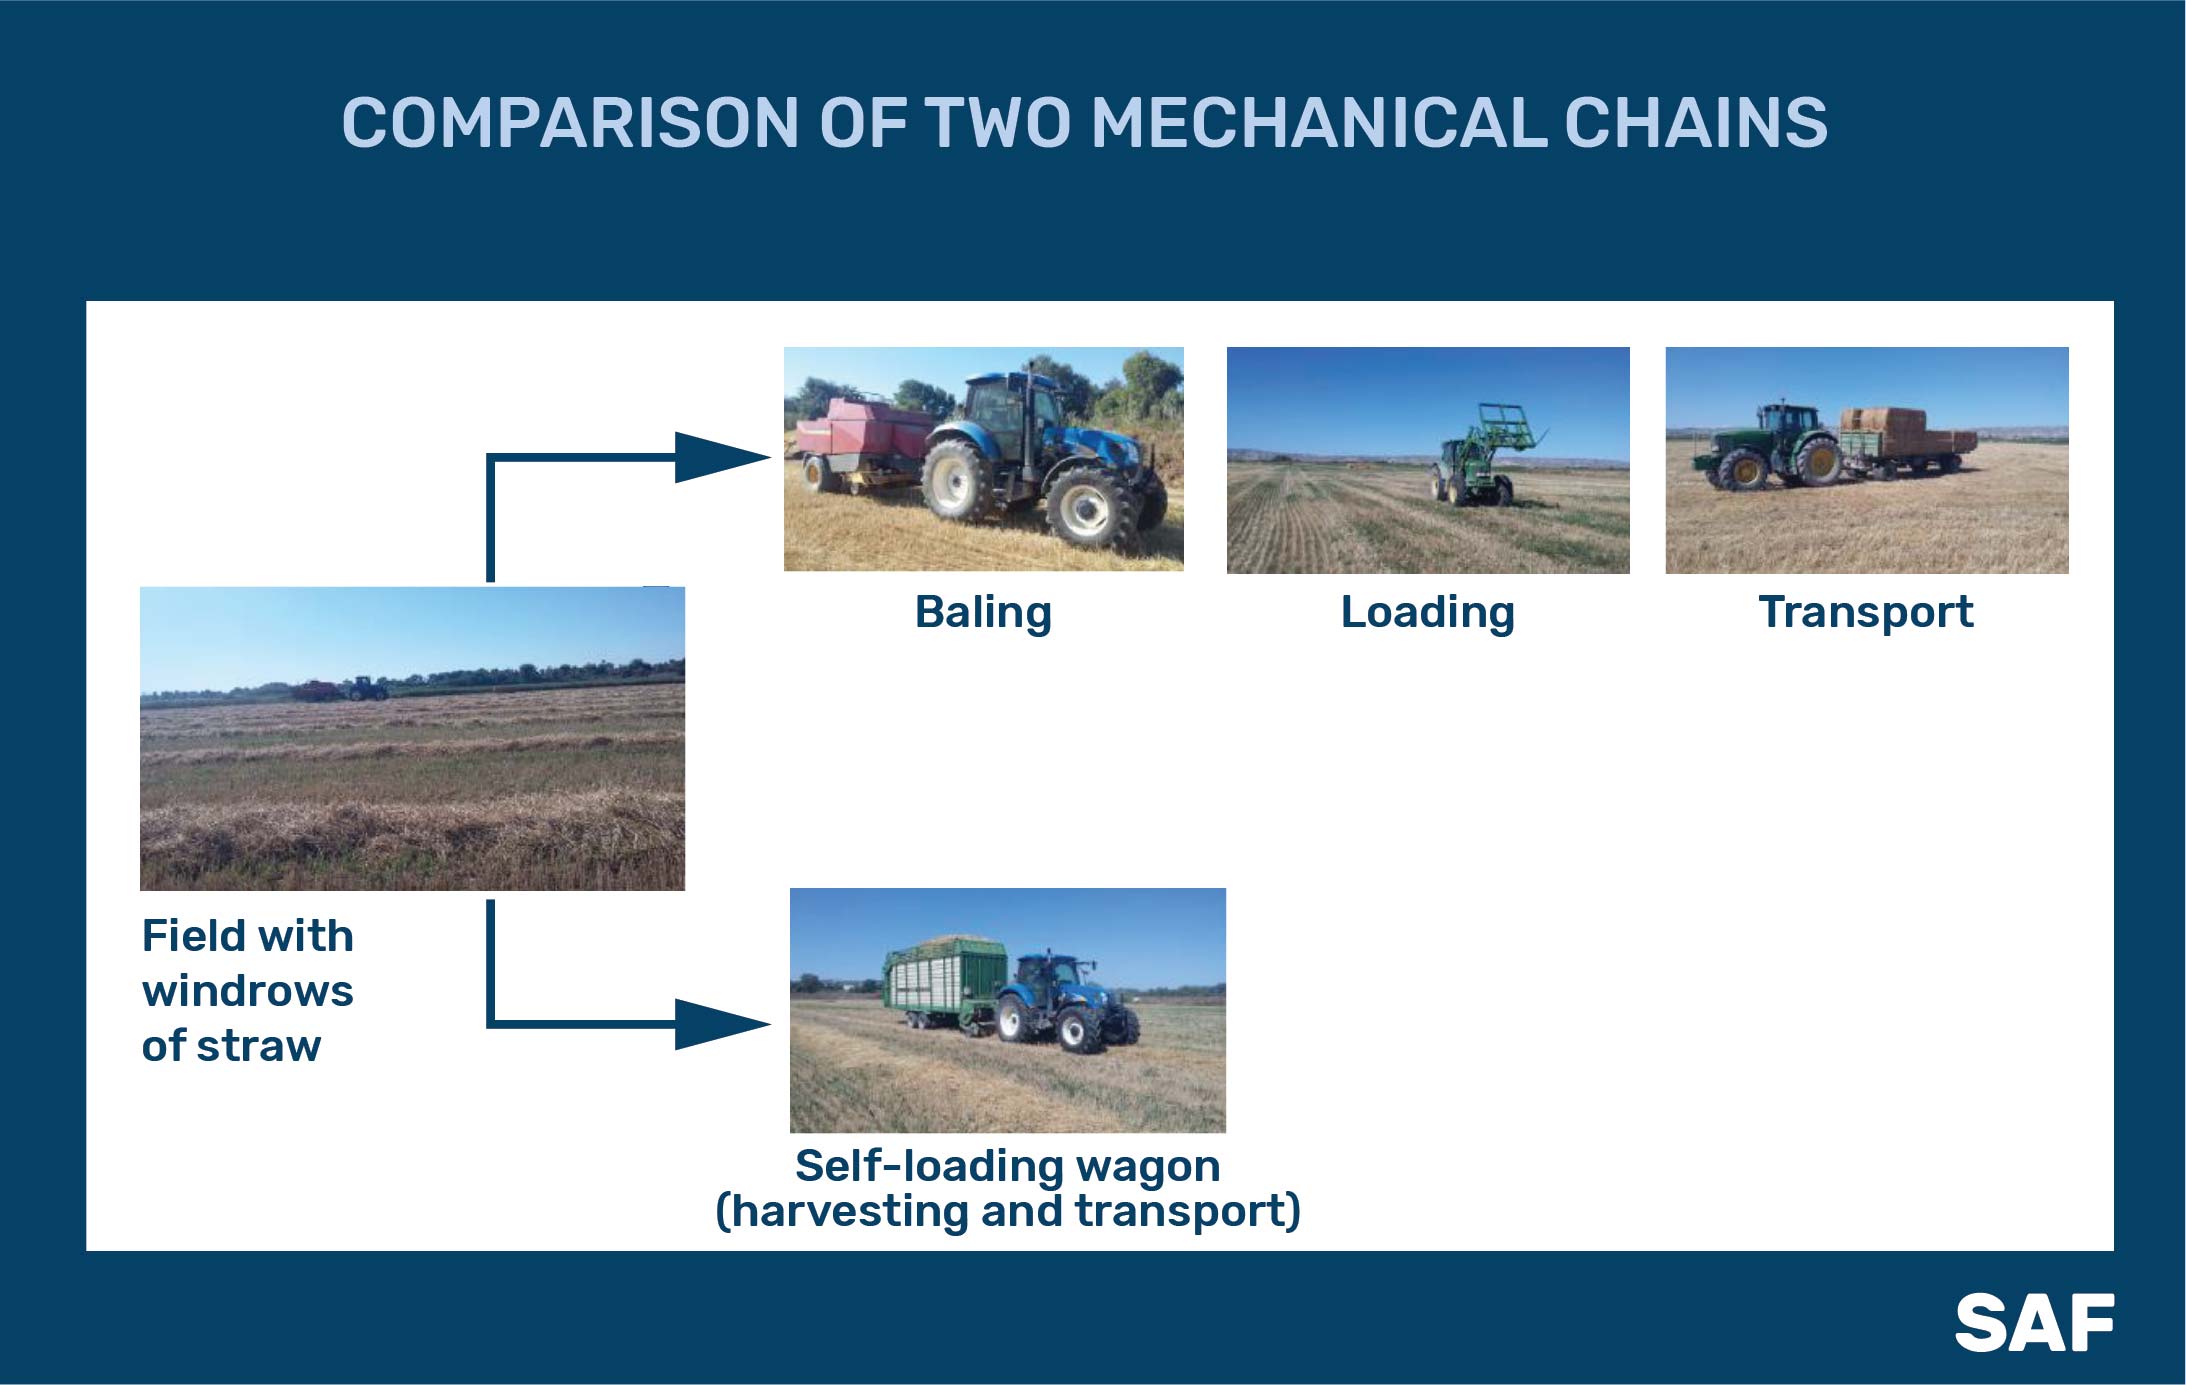 Comparison of two mechanical chains